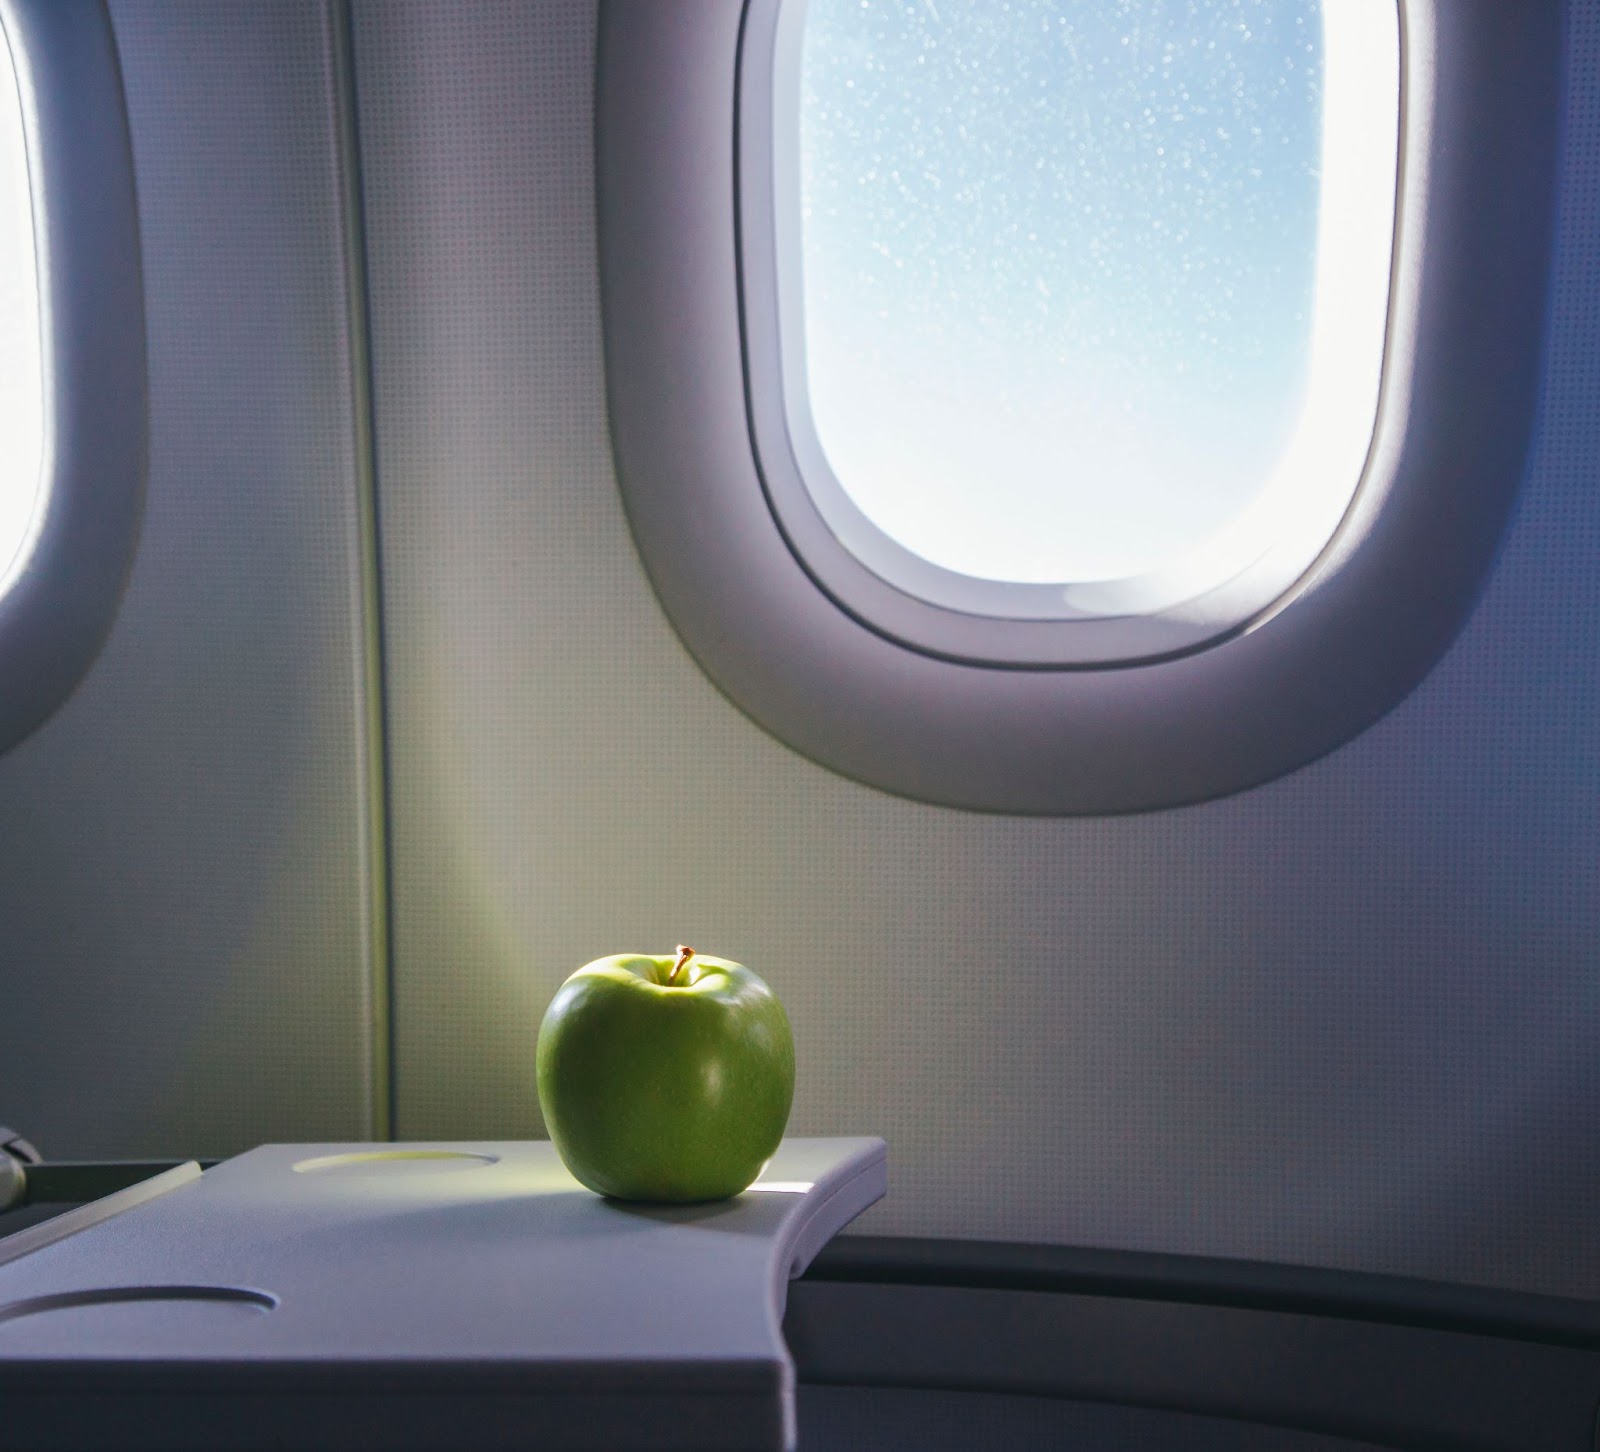 Green apple being eaten on an airplane